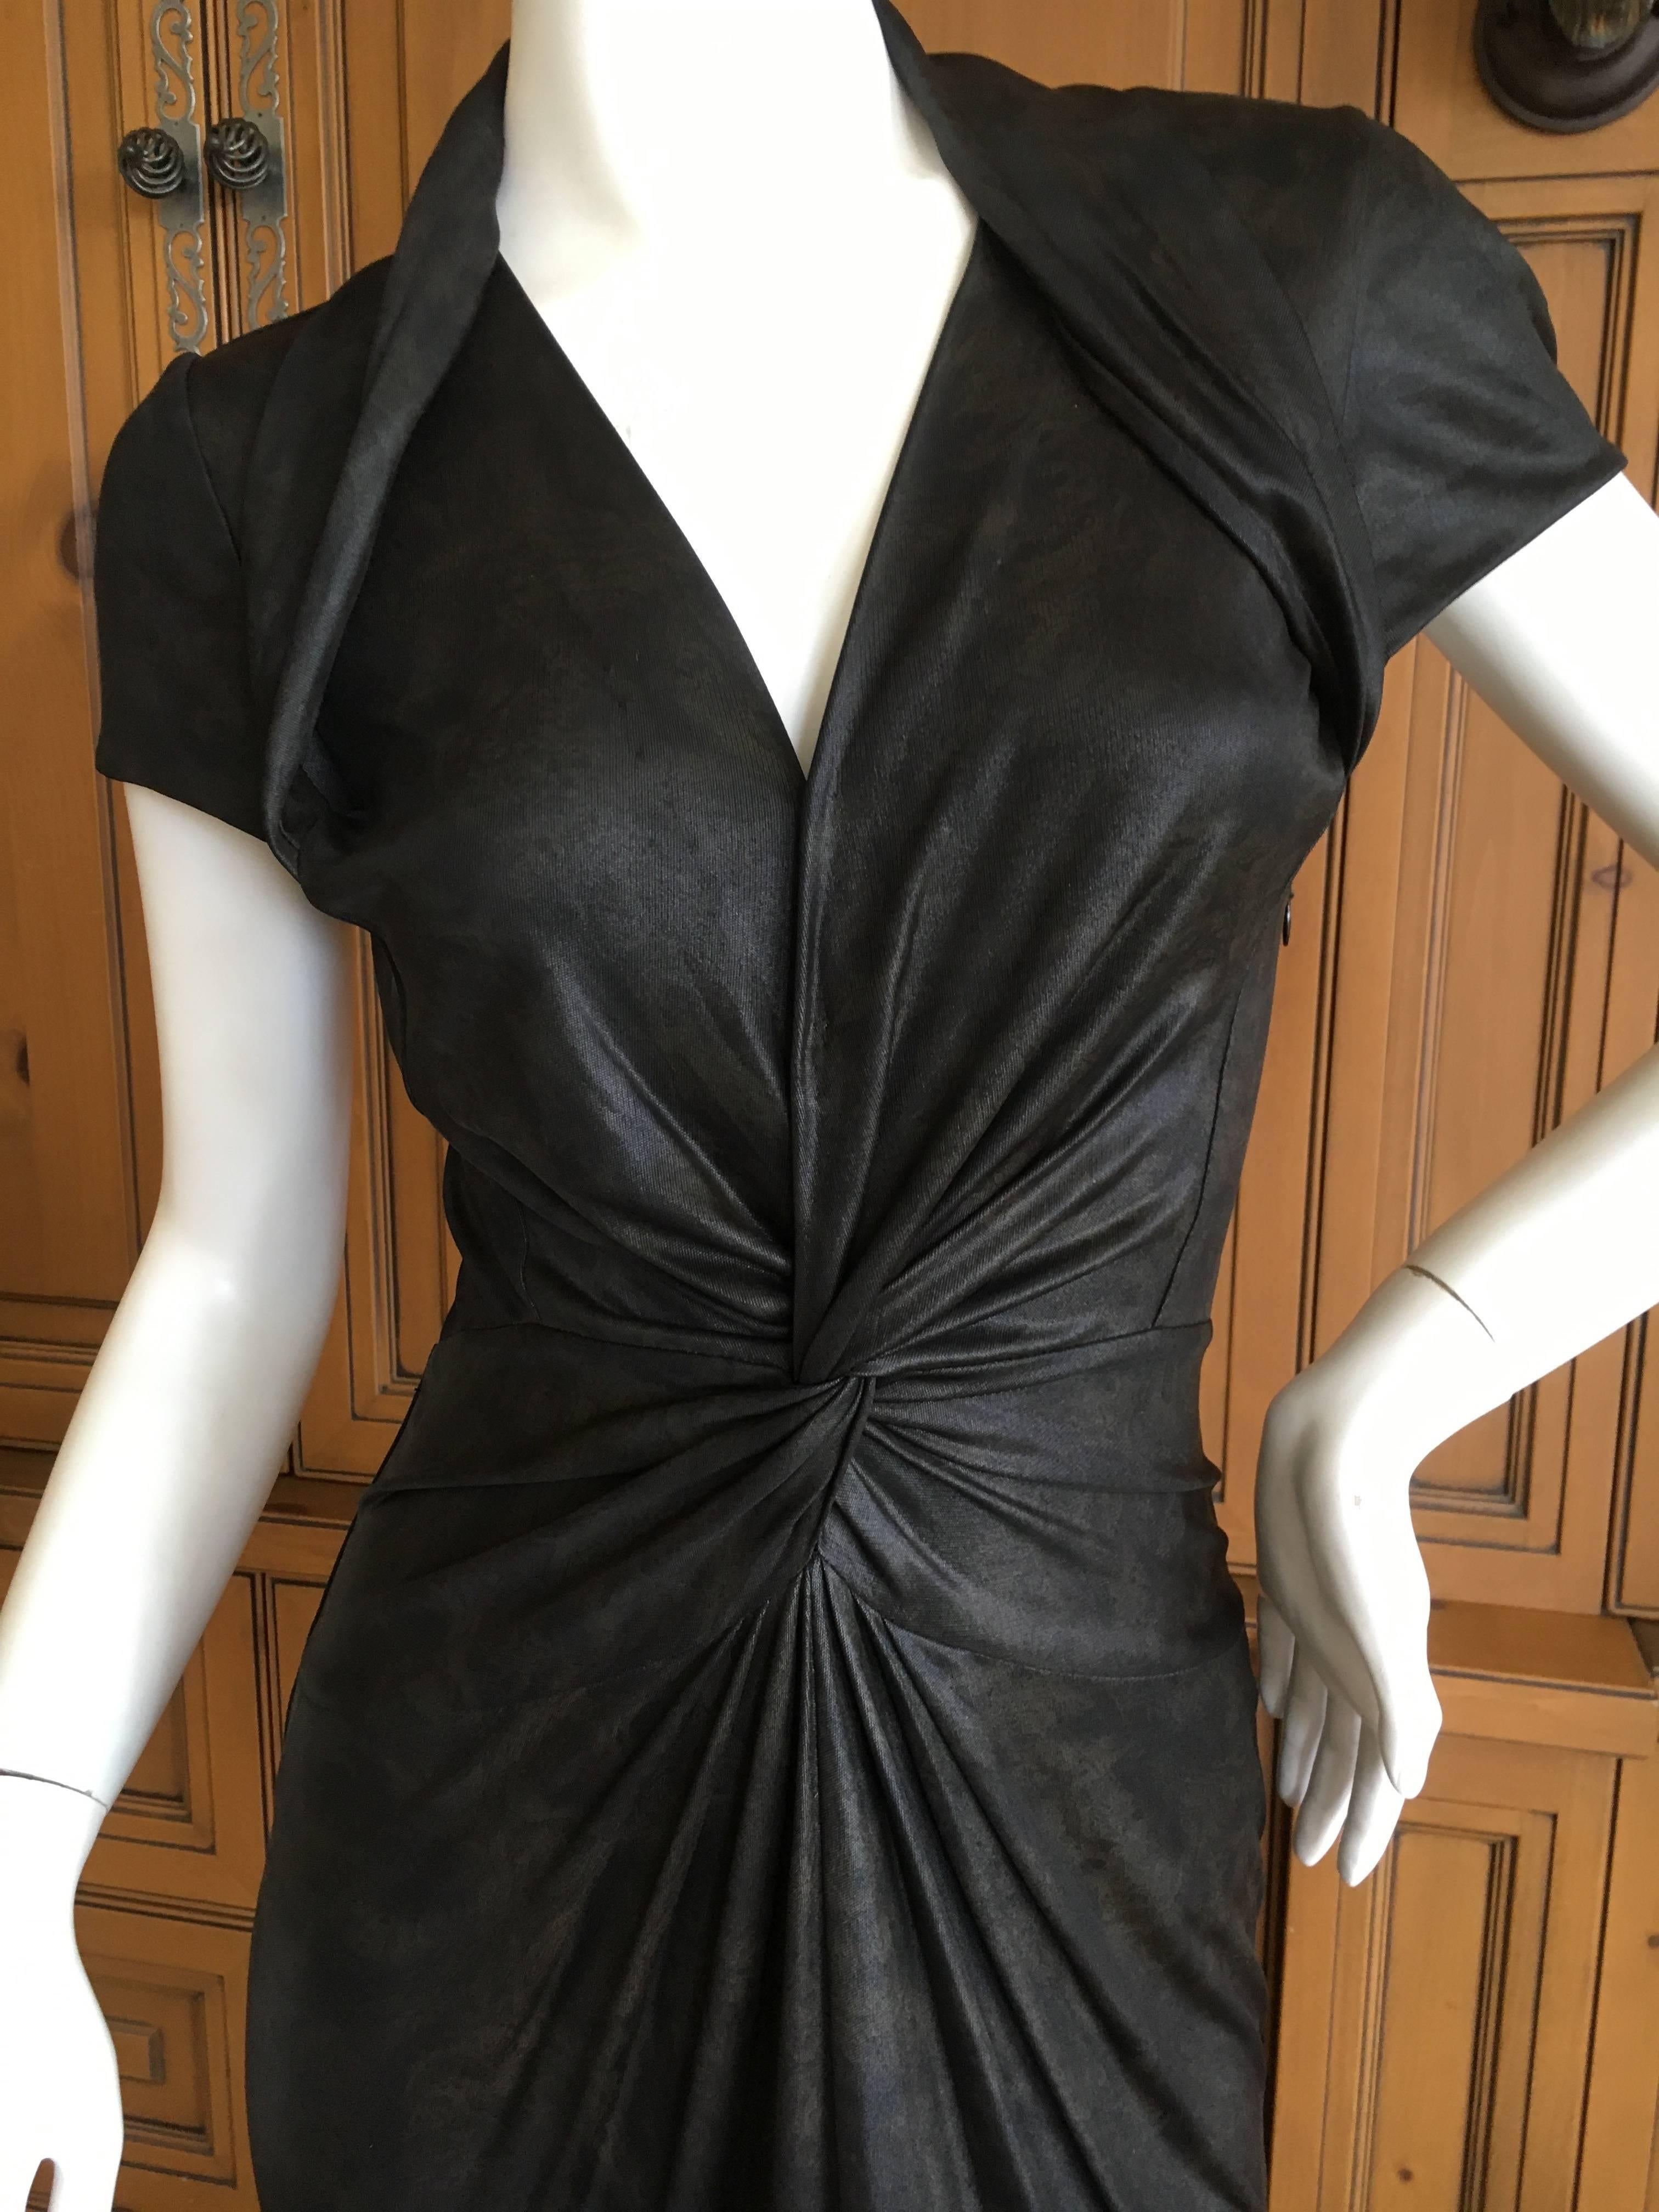 John Galliano Vintage 1990's Low Cut Knot Dress In Excellent Condition For Sale In Cloverdale, CA